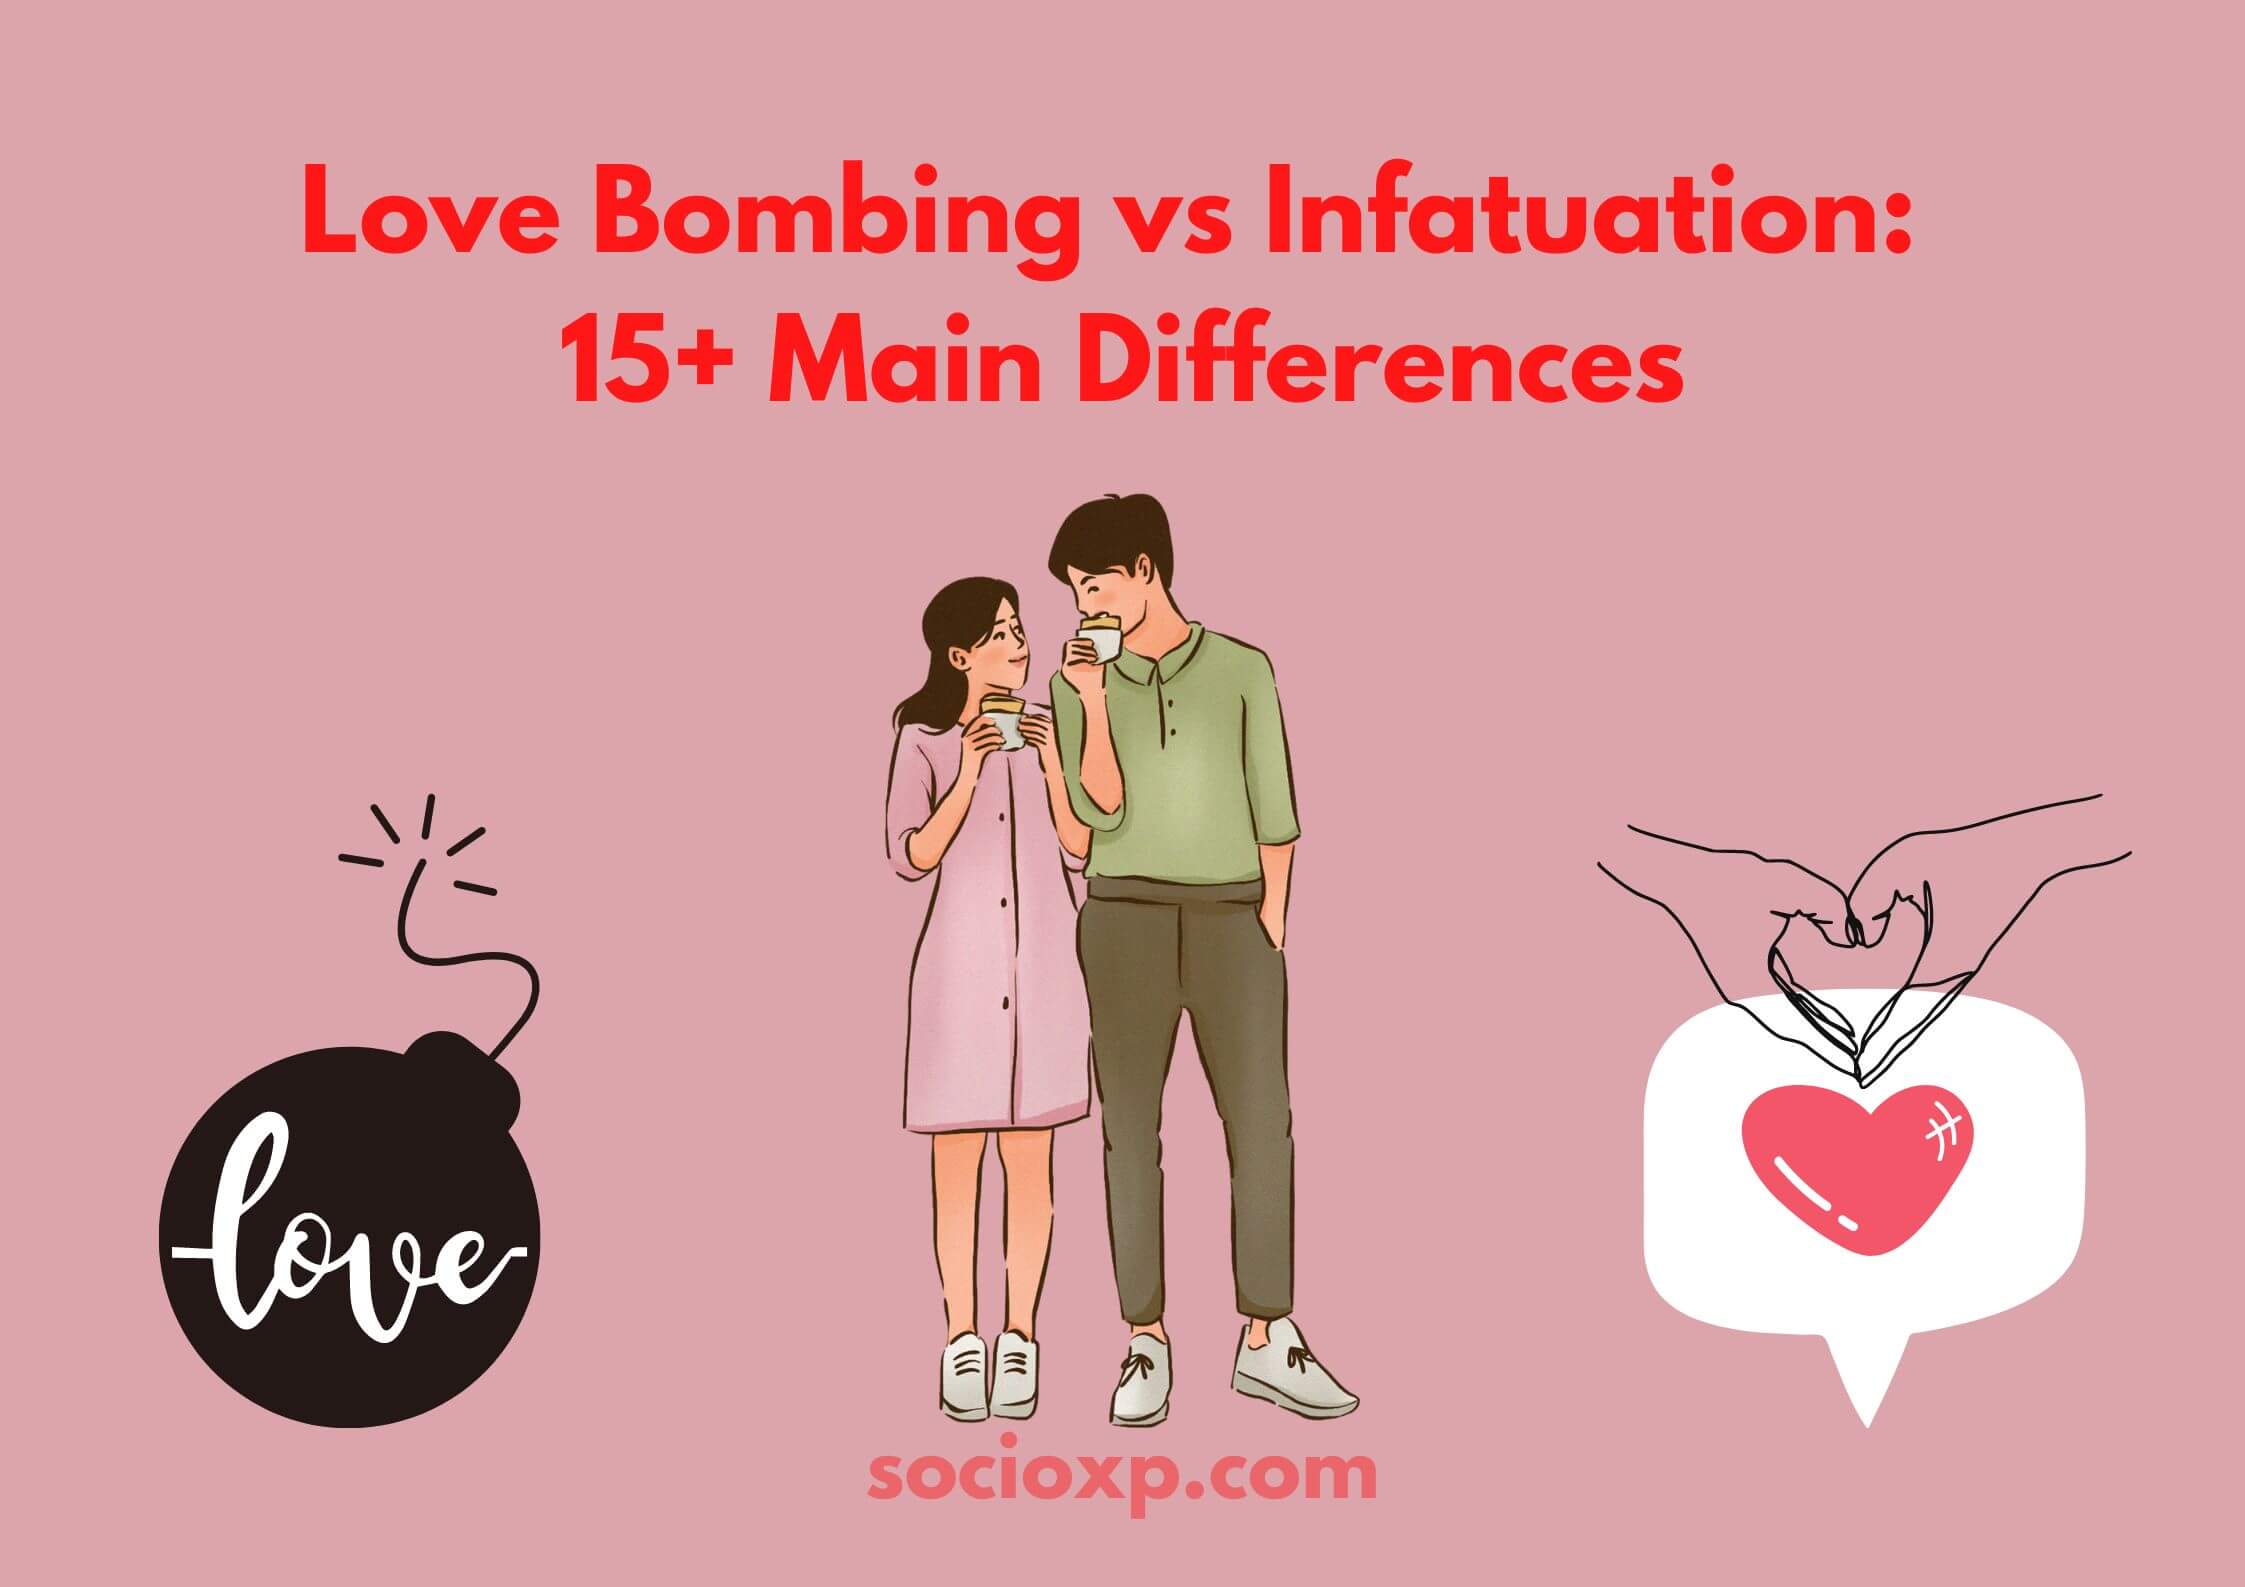 Love Bombing vs Infatuation: 15+ Main Differences